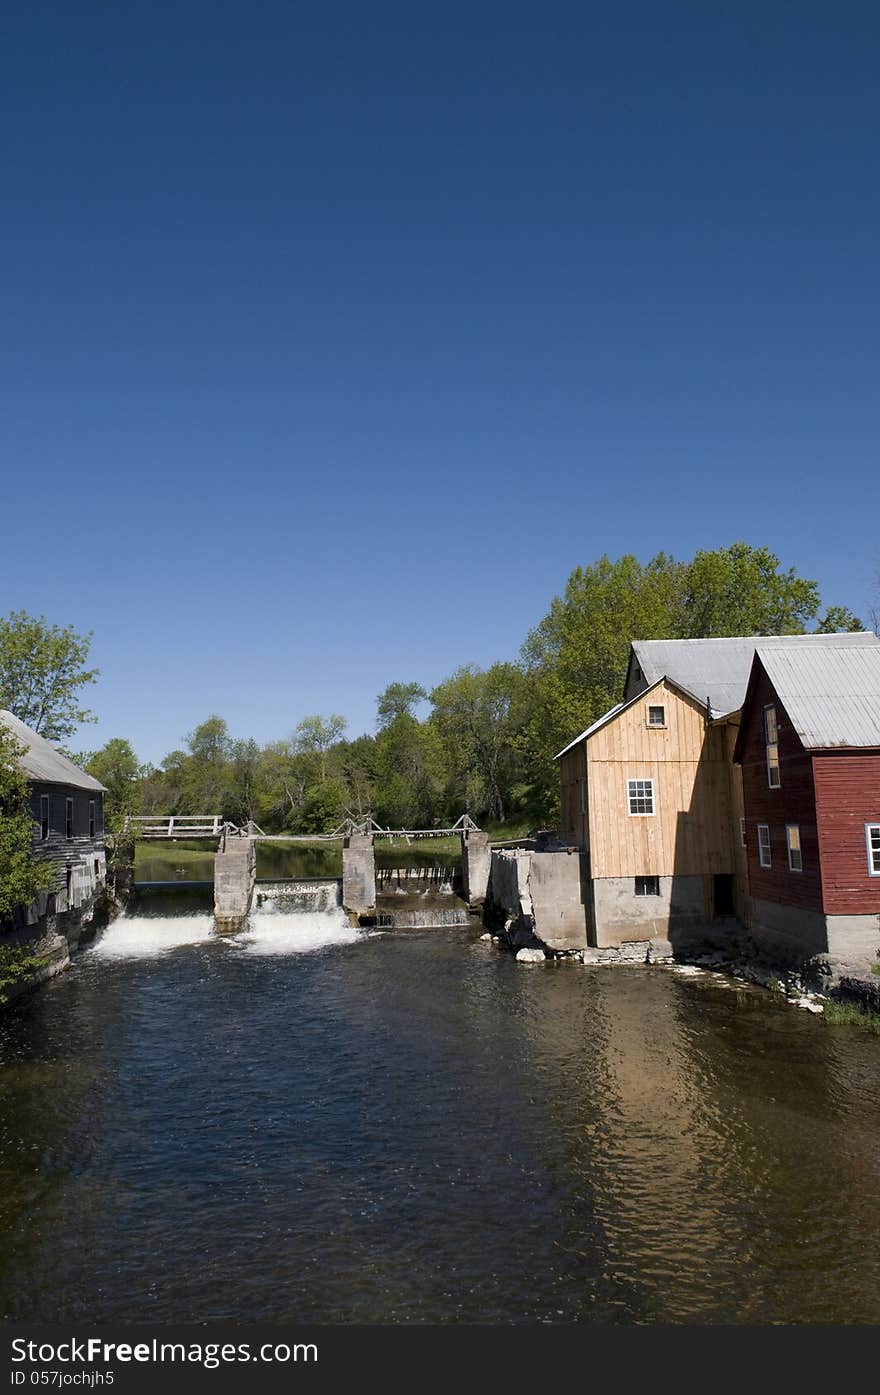 Old mill on the creek with large copy area in the deep blue sky